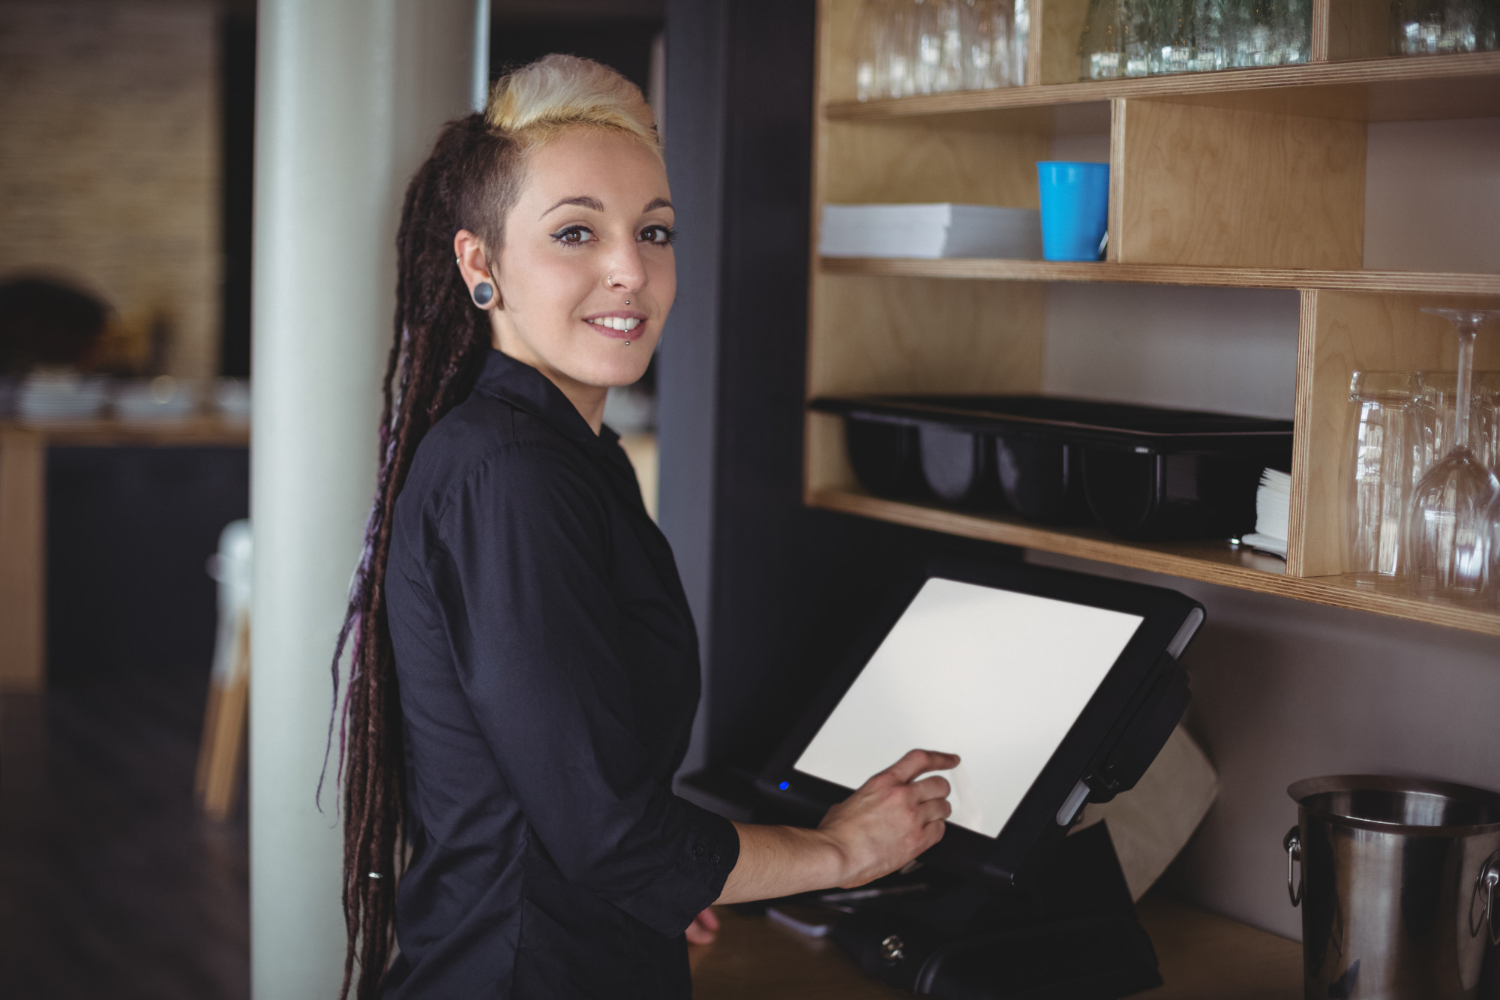 A waitress with long black and blond hair stands at a restaurant POS system, inputting a customer order. She's wearing all black, and is looking over her shoulder at the camera.